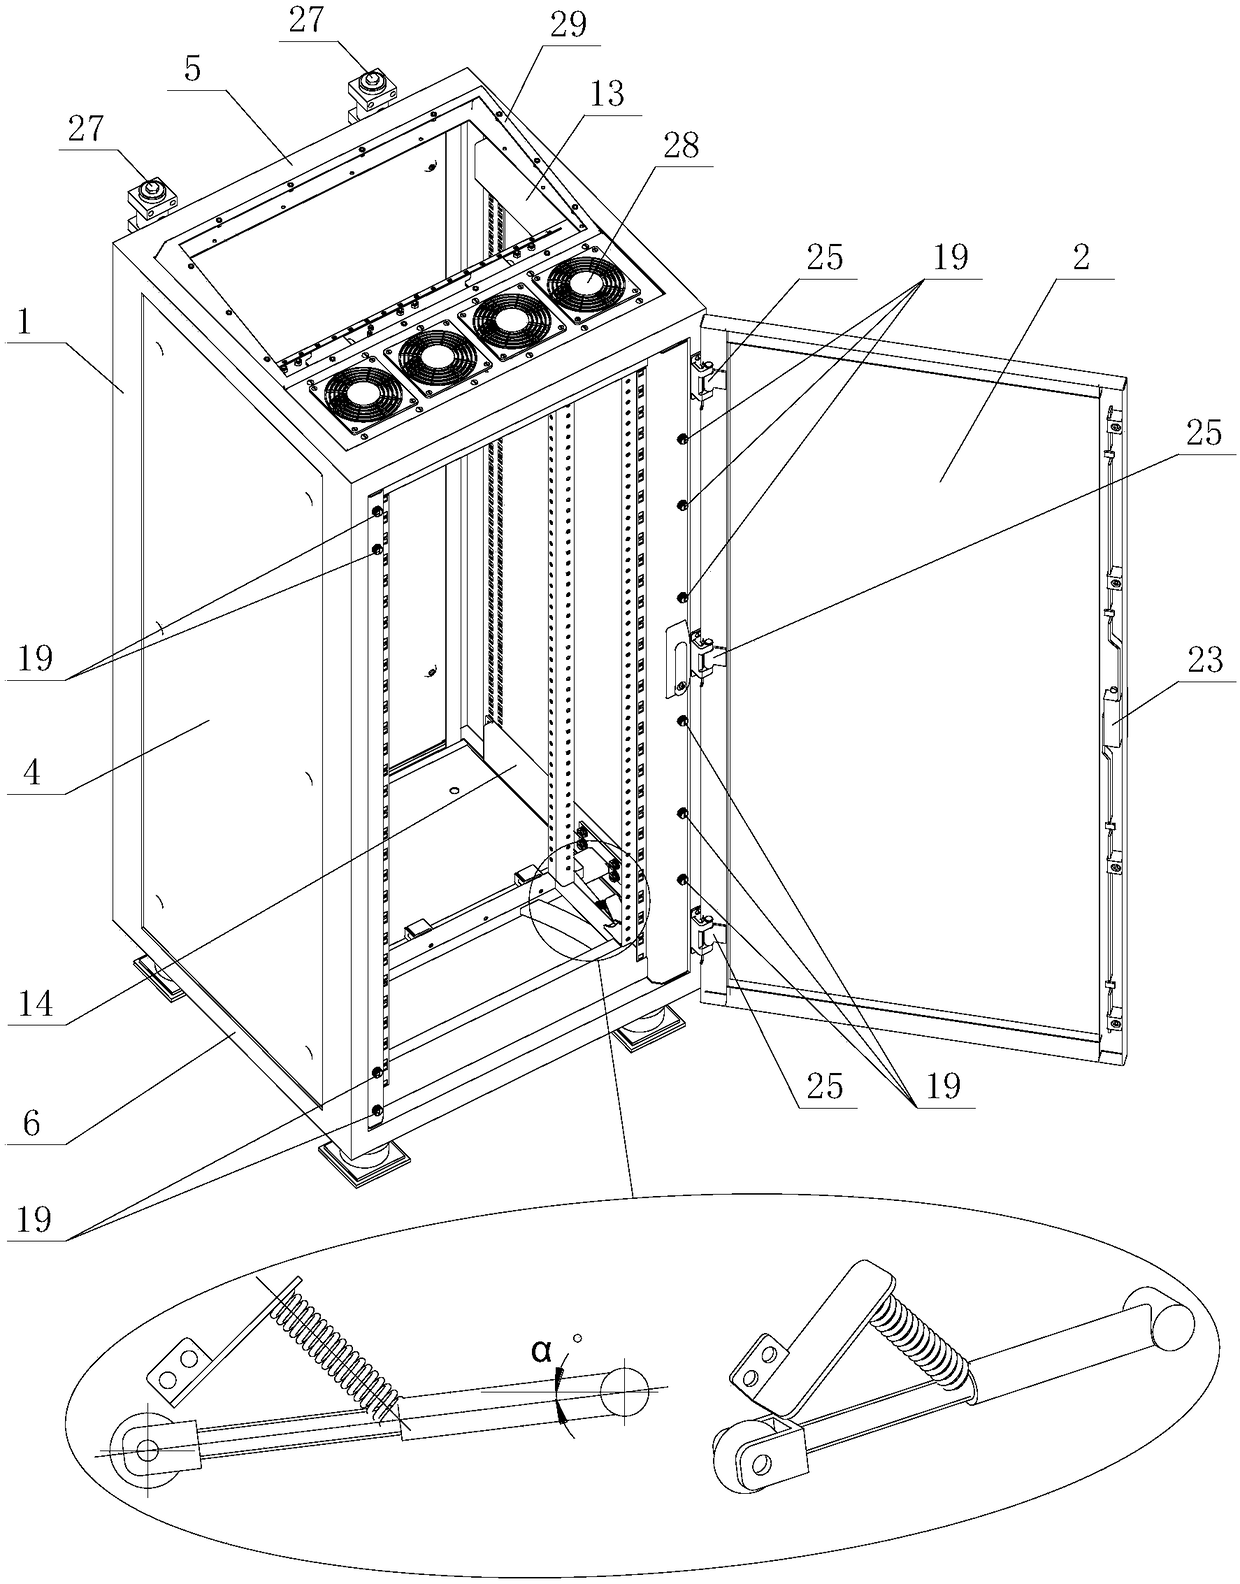 Cradle cabinet for pull-type radar electronic device